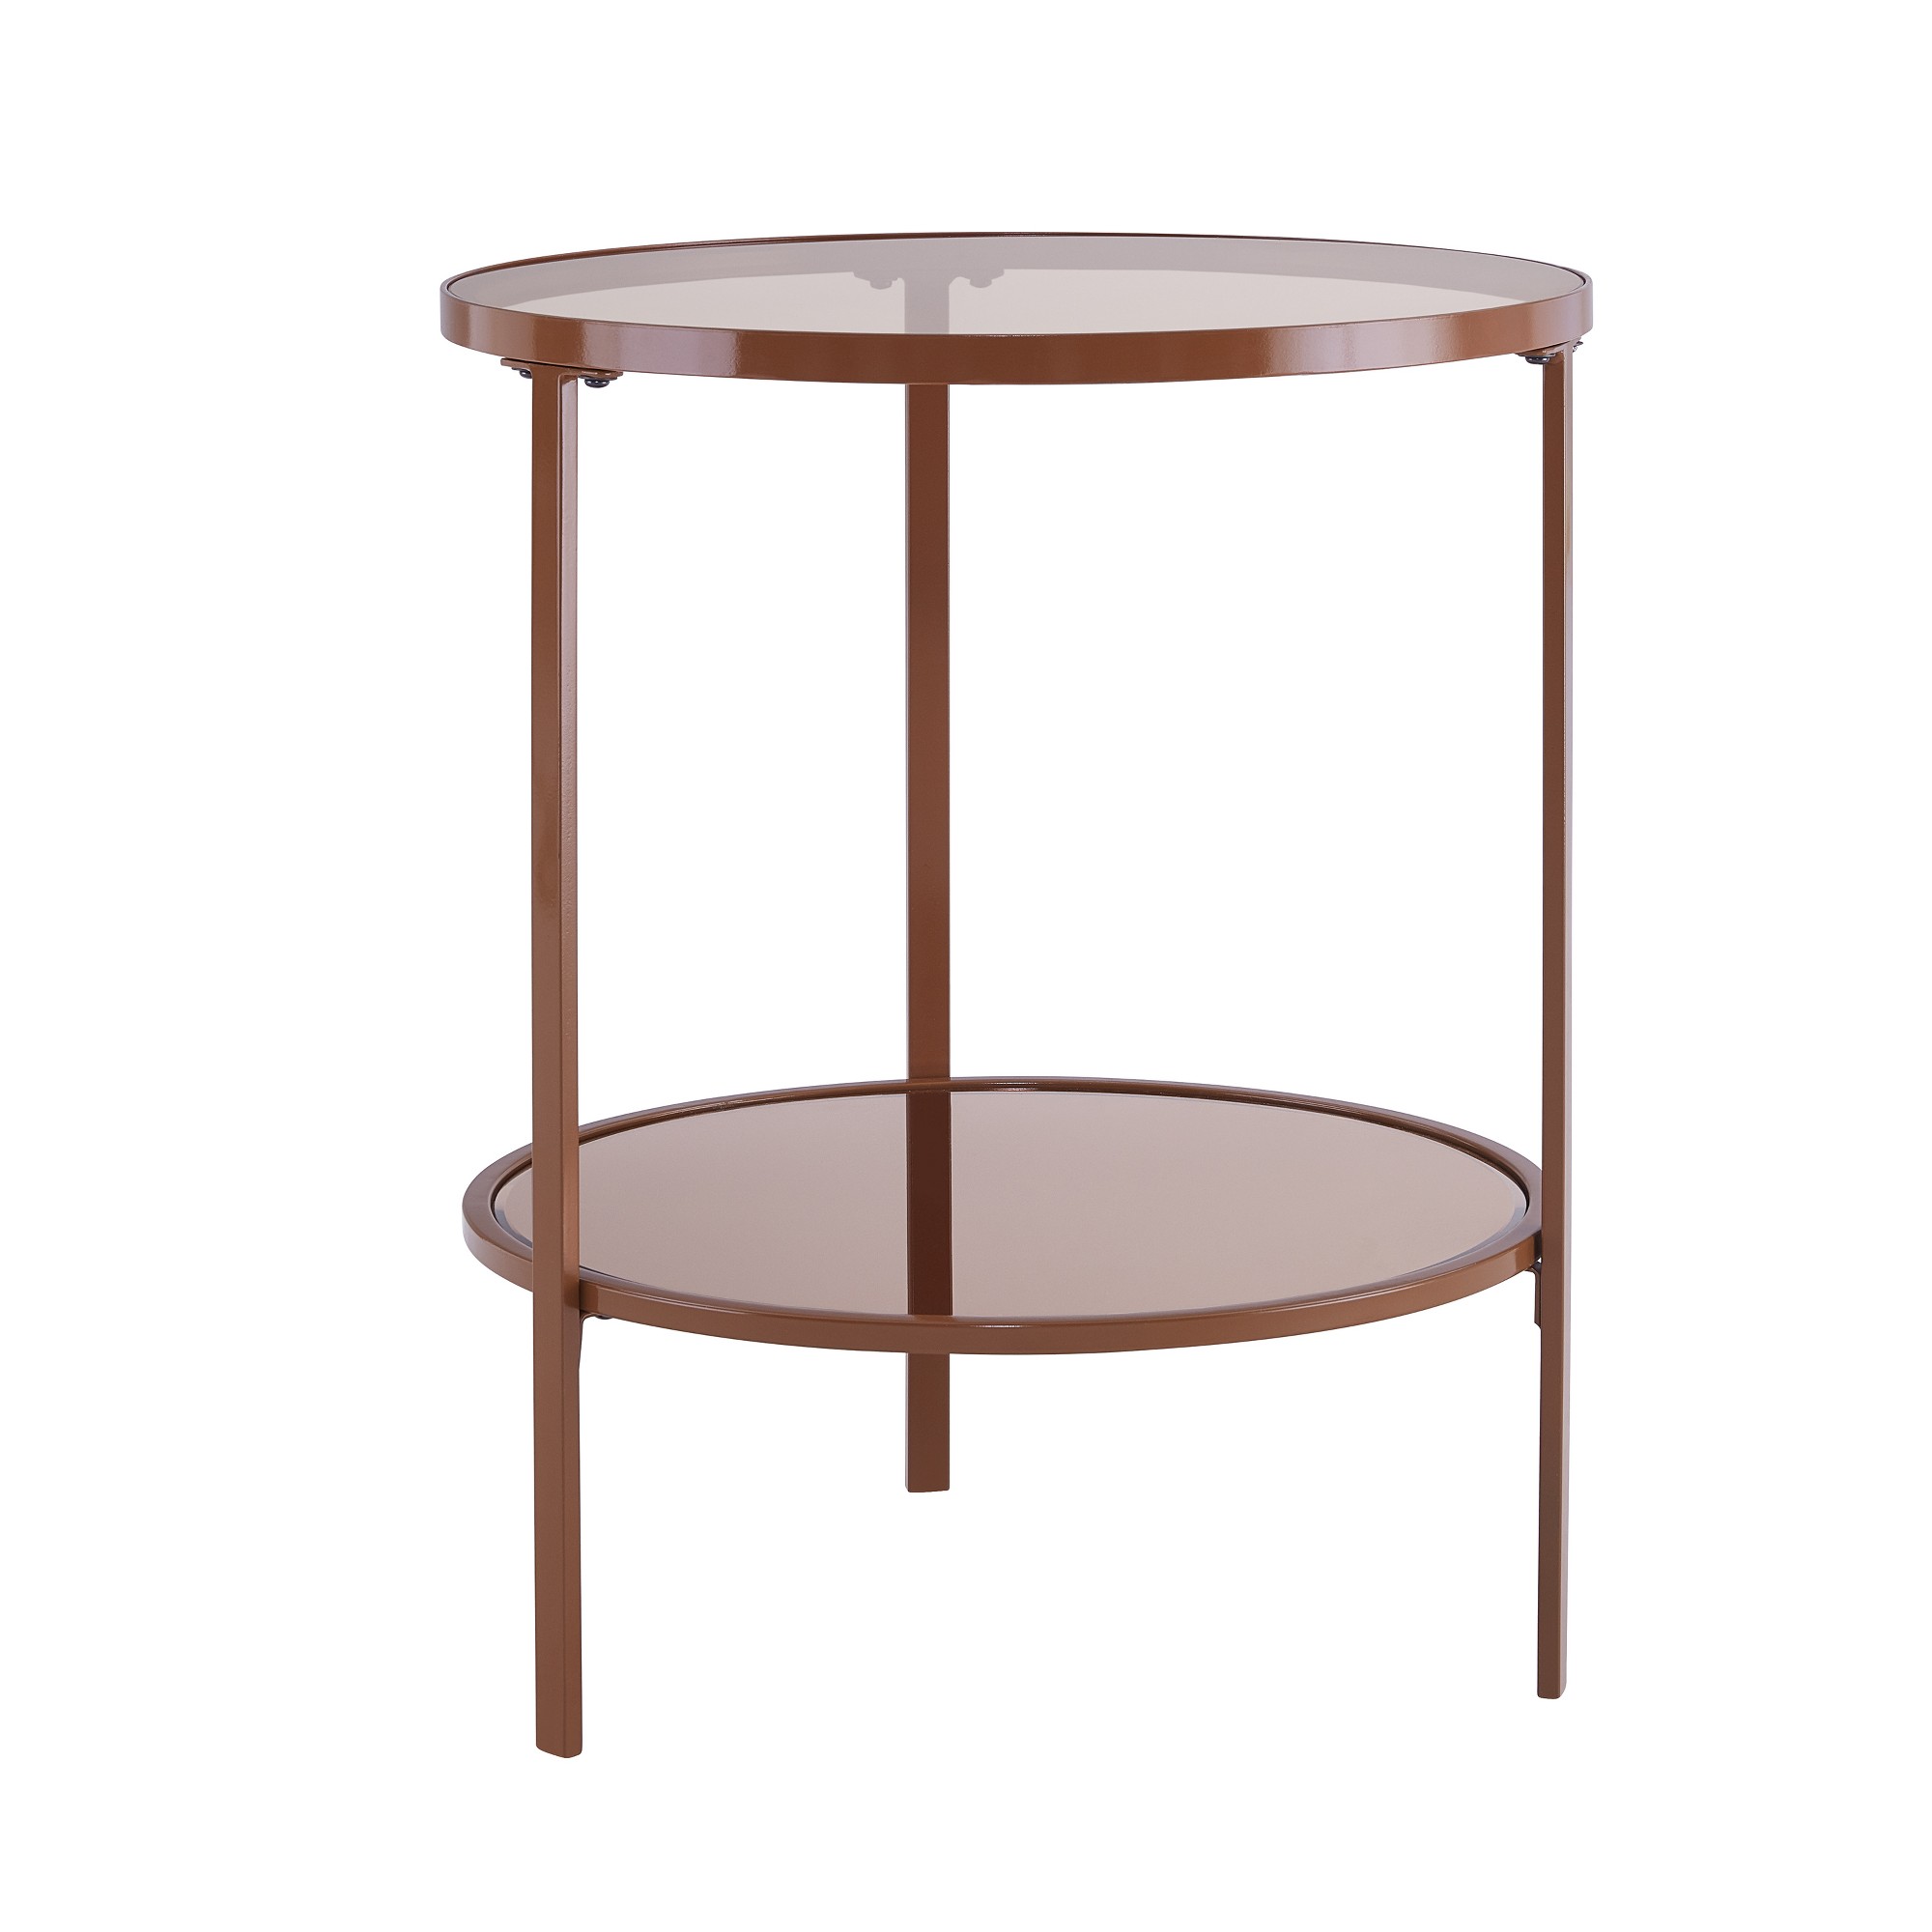 lenae glass side table brown aiden lane products stained end tables black real leather sofa liberty furniture ocean isle collection ashley living room ethan allen american